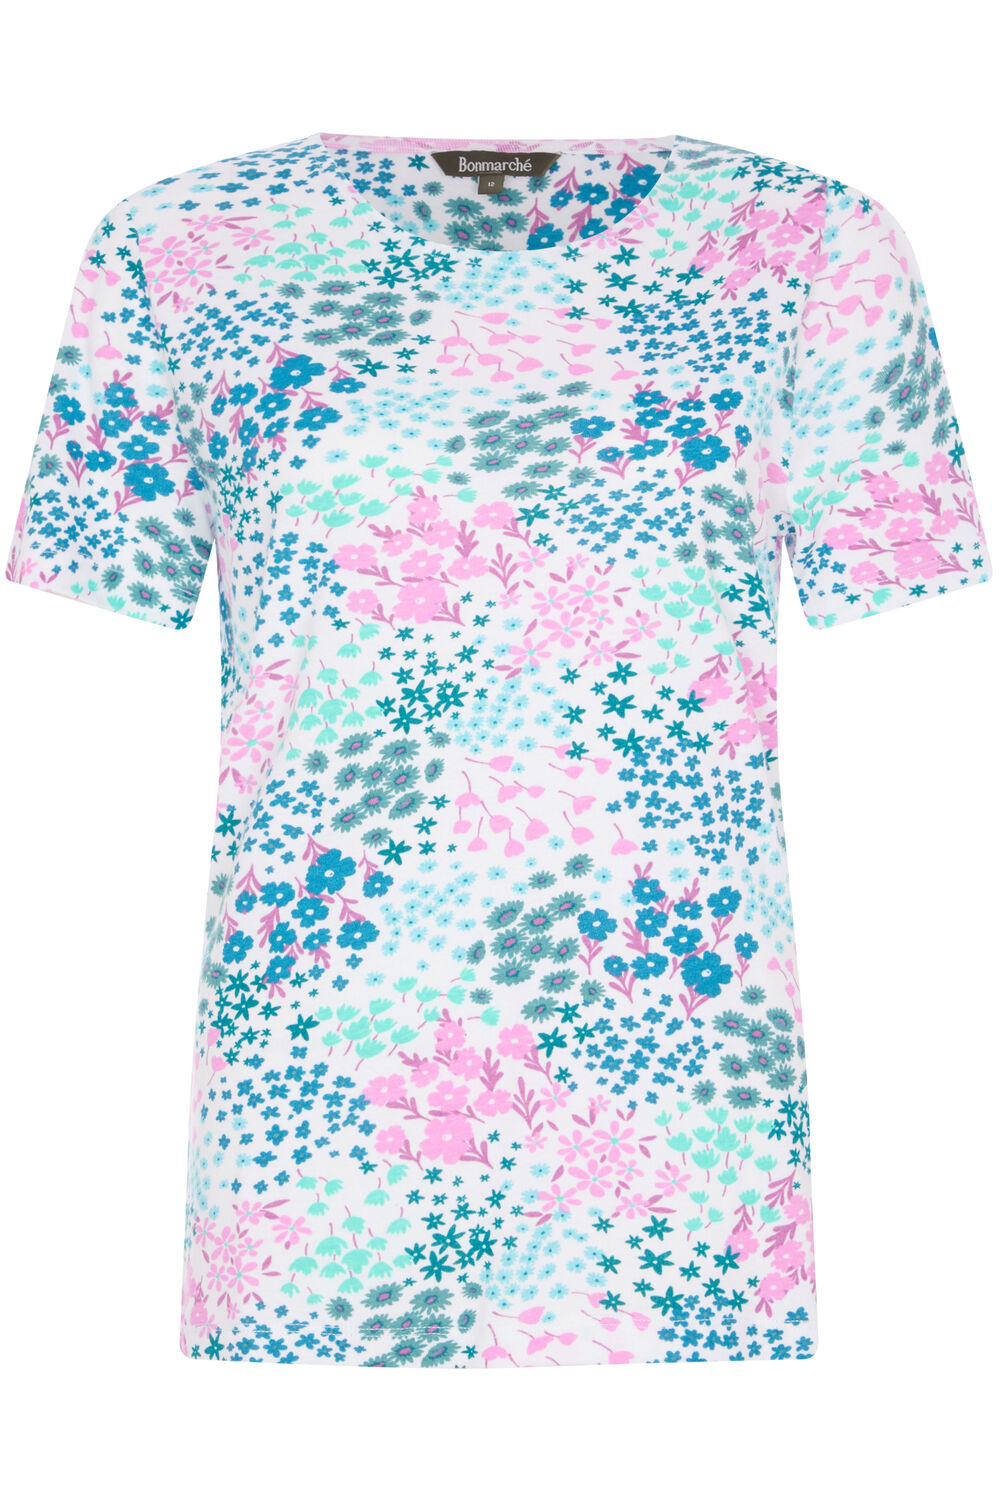 Bonmarche Ivory Short Sleeve Pressed Ditsy Print Scoop Neck T-Shirt, Size: 14